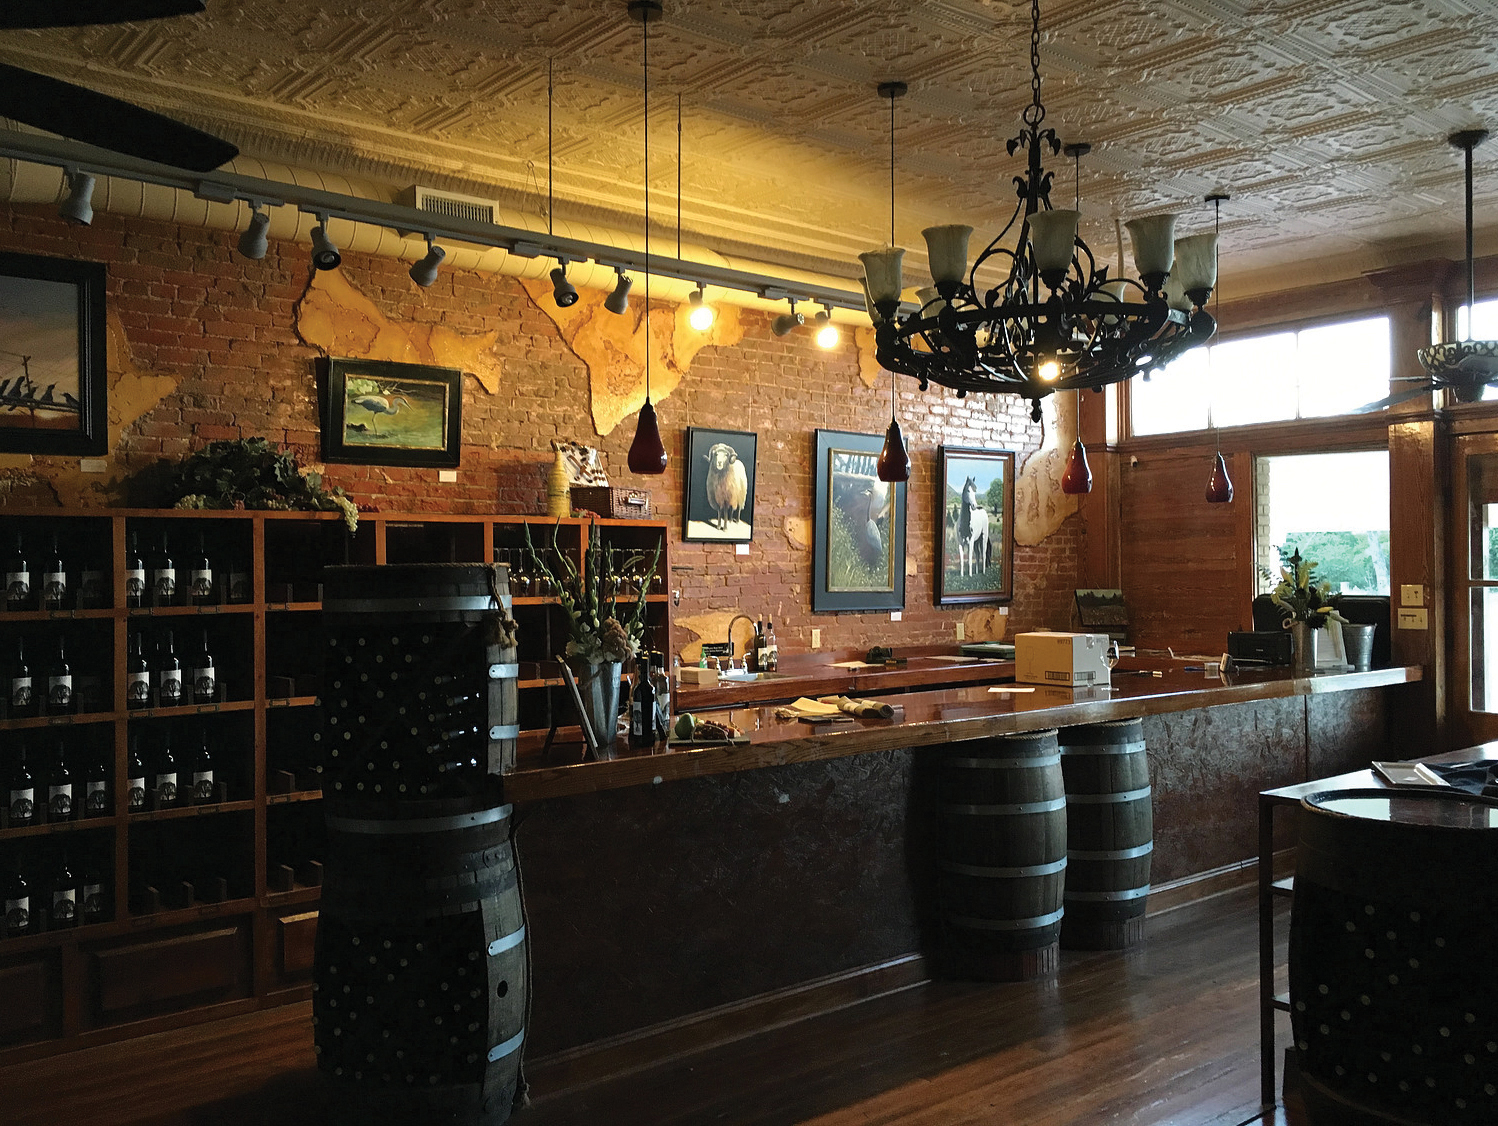 The tasting room of Kissing Tree has a bar and several barrels of wine